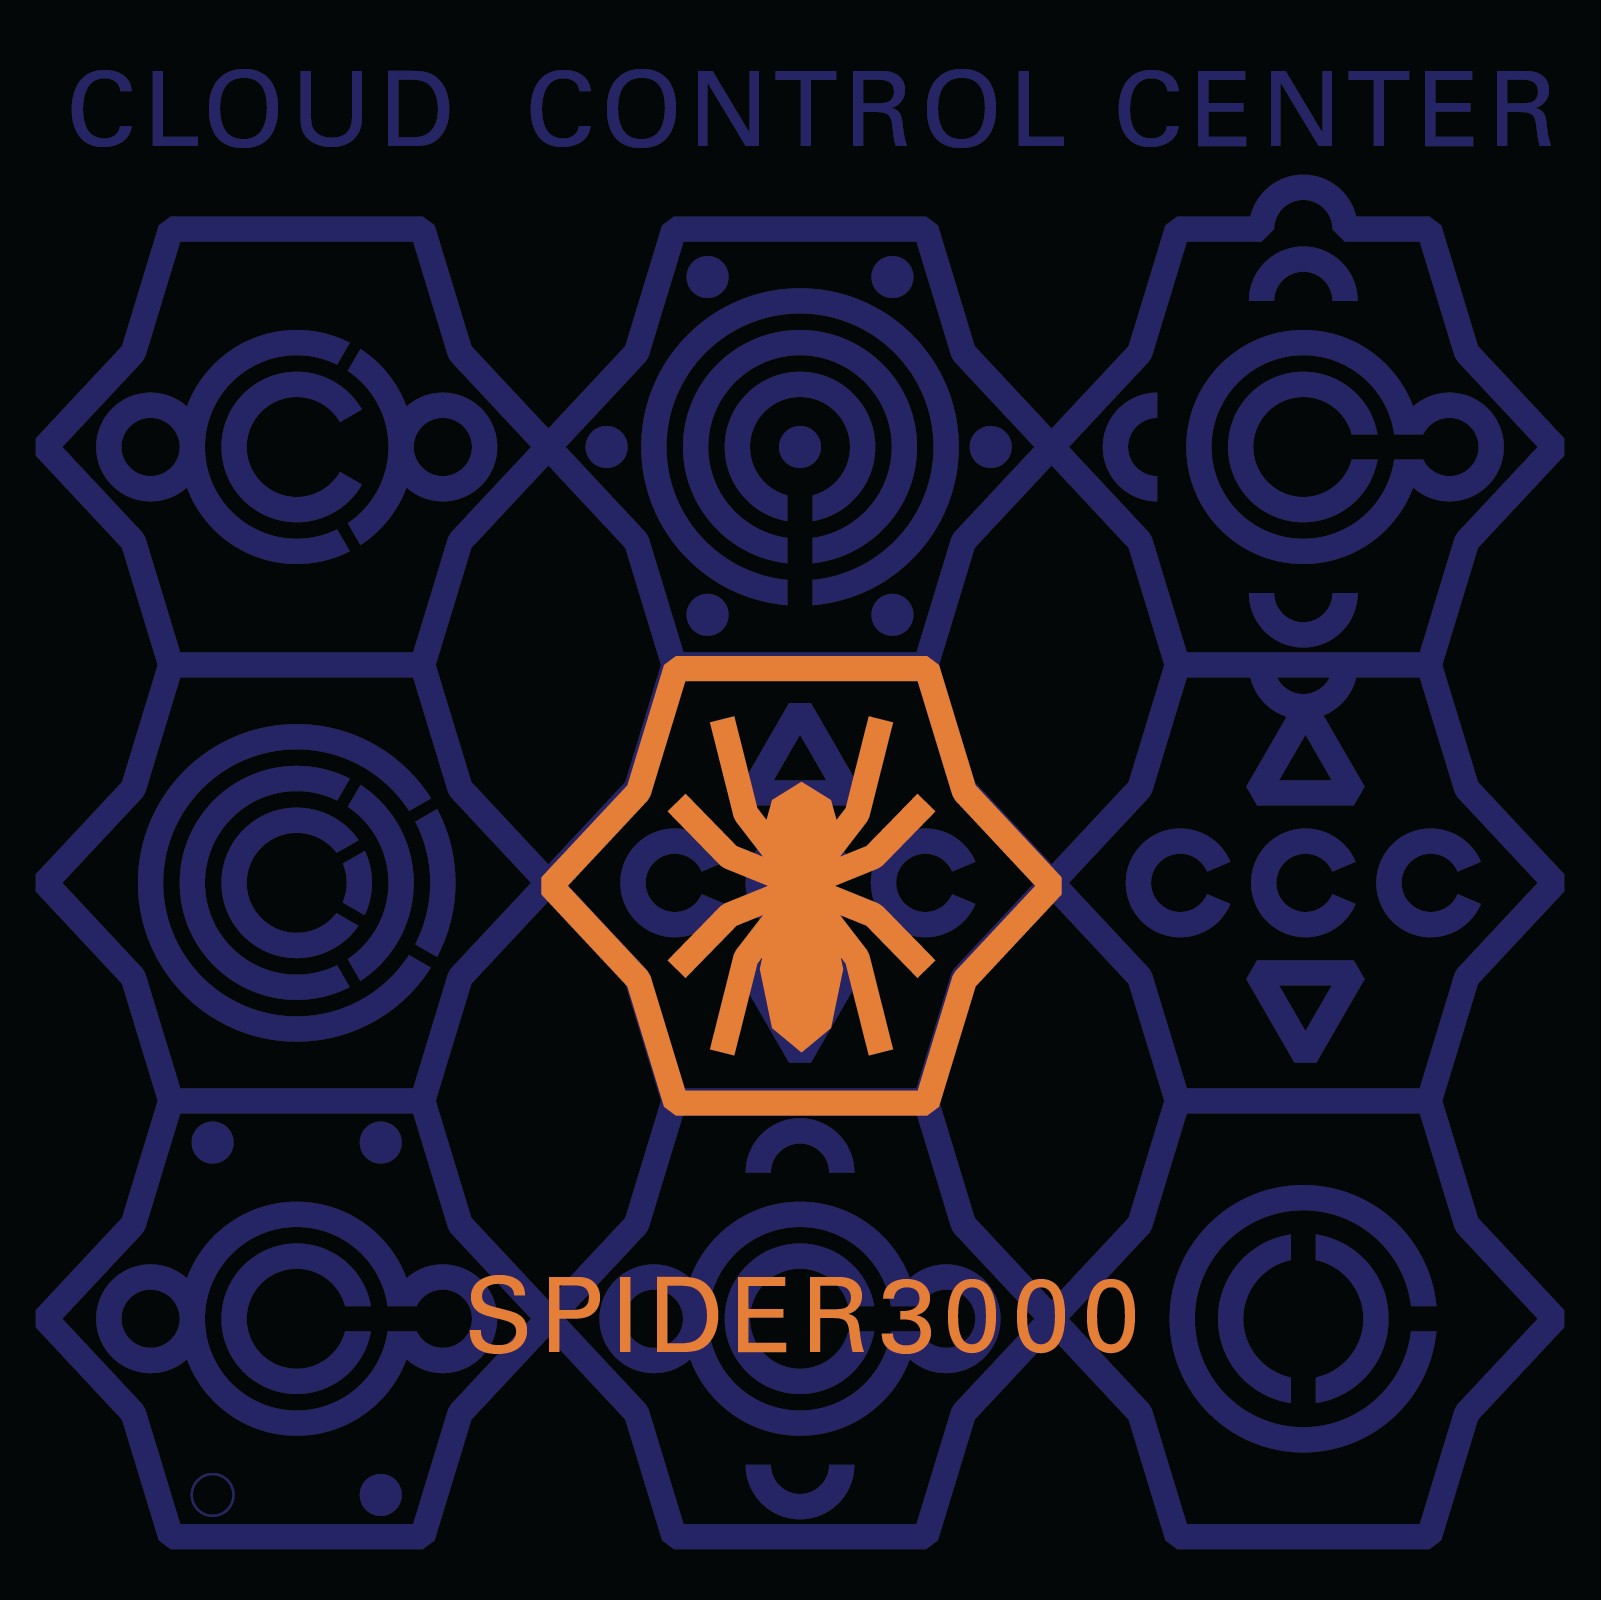 studio-namespace-ccc-spider3000.png